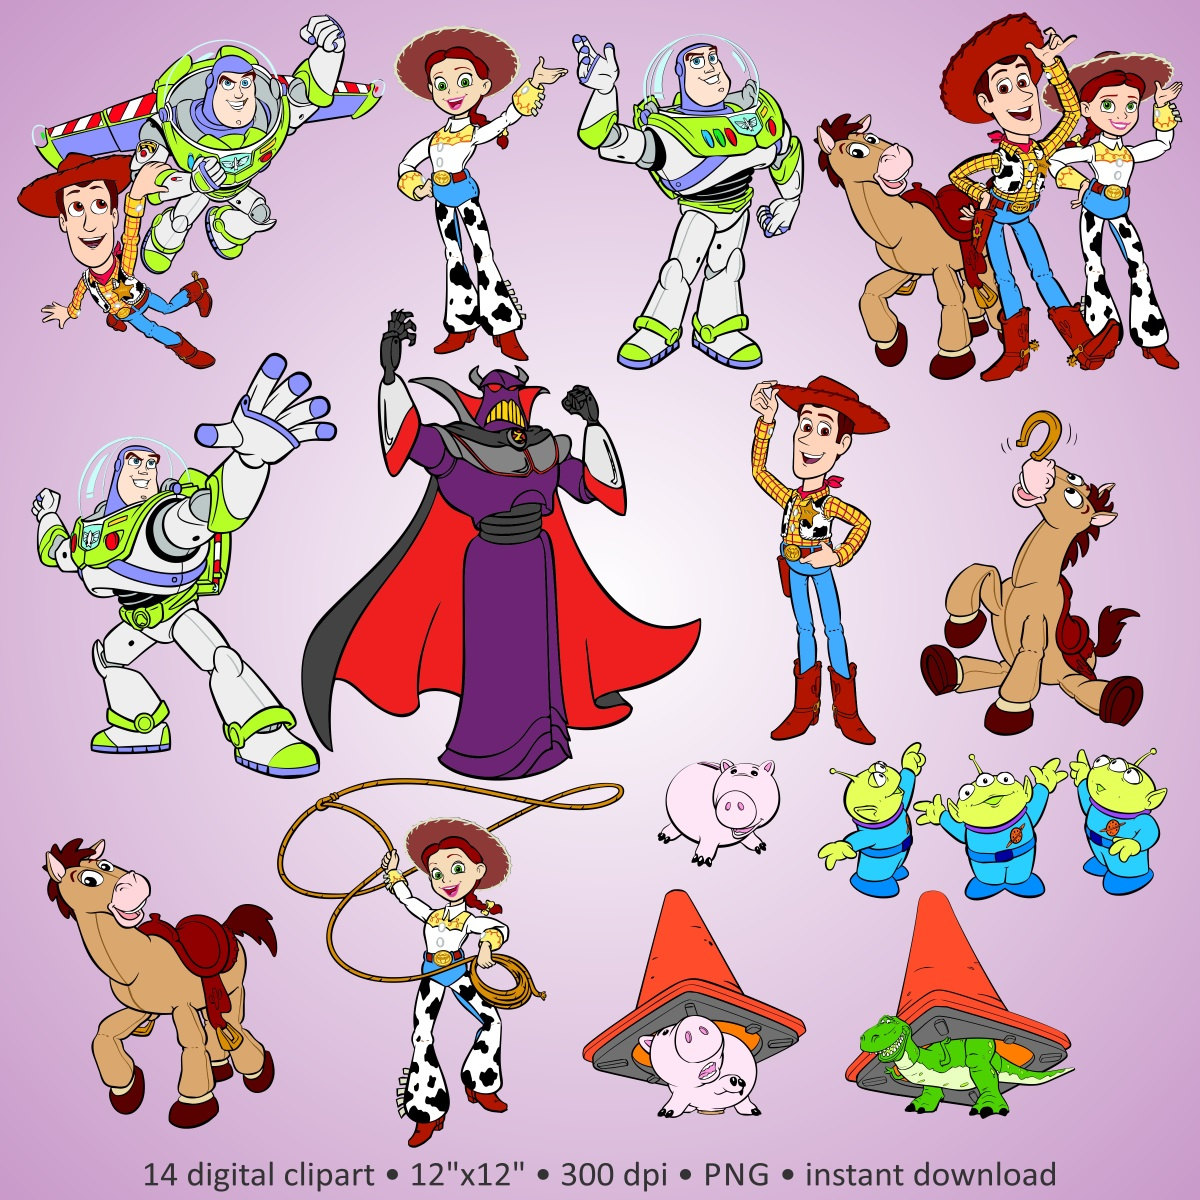 Digital Clipart u0026quot;Toy Storyu0026quot; cartoon characters Disney, fantastic party friends, drawing funny pictures for scrapbook